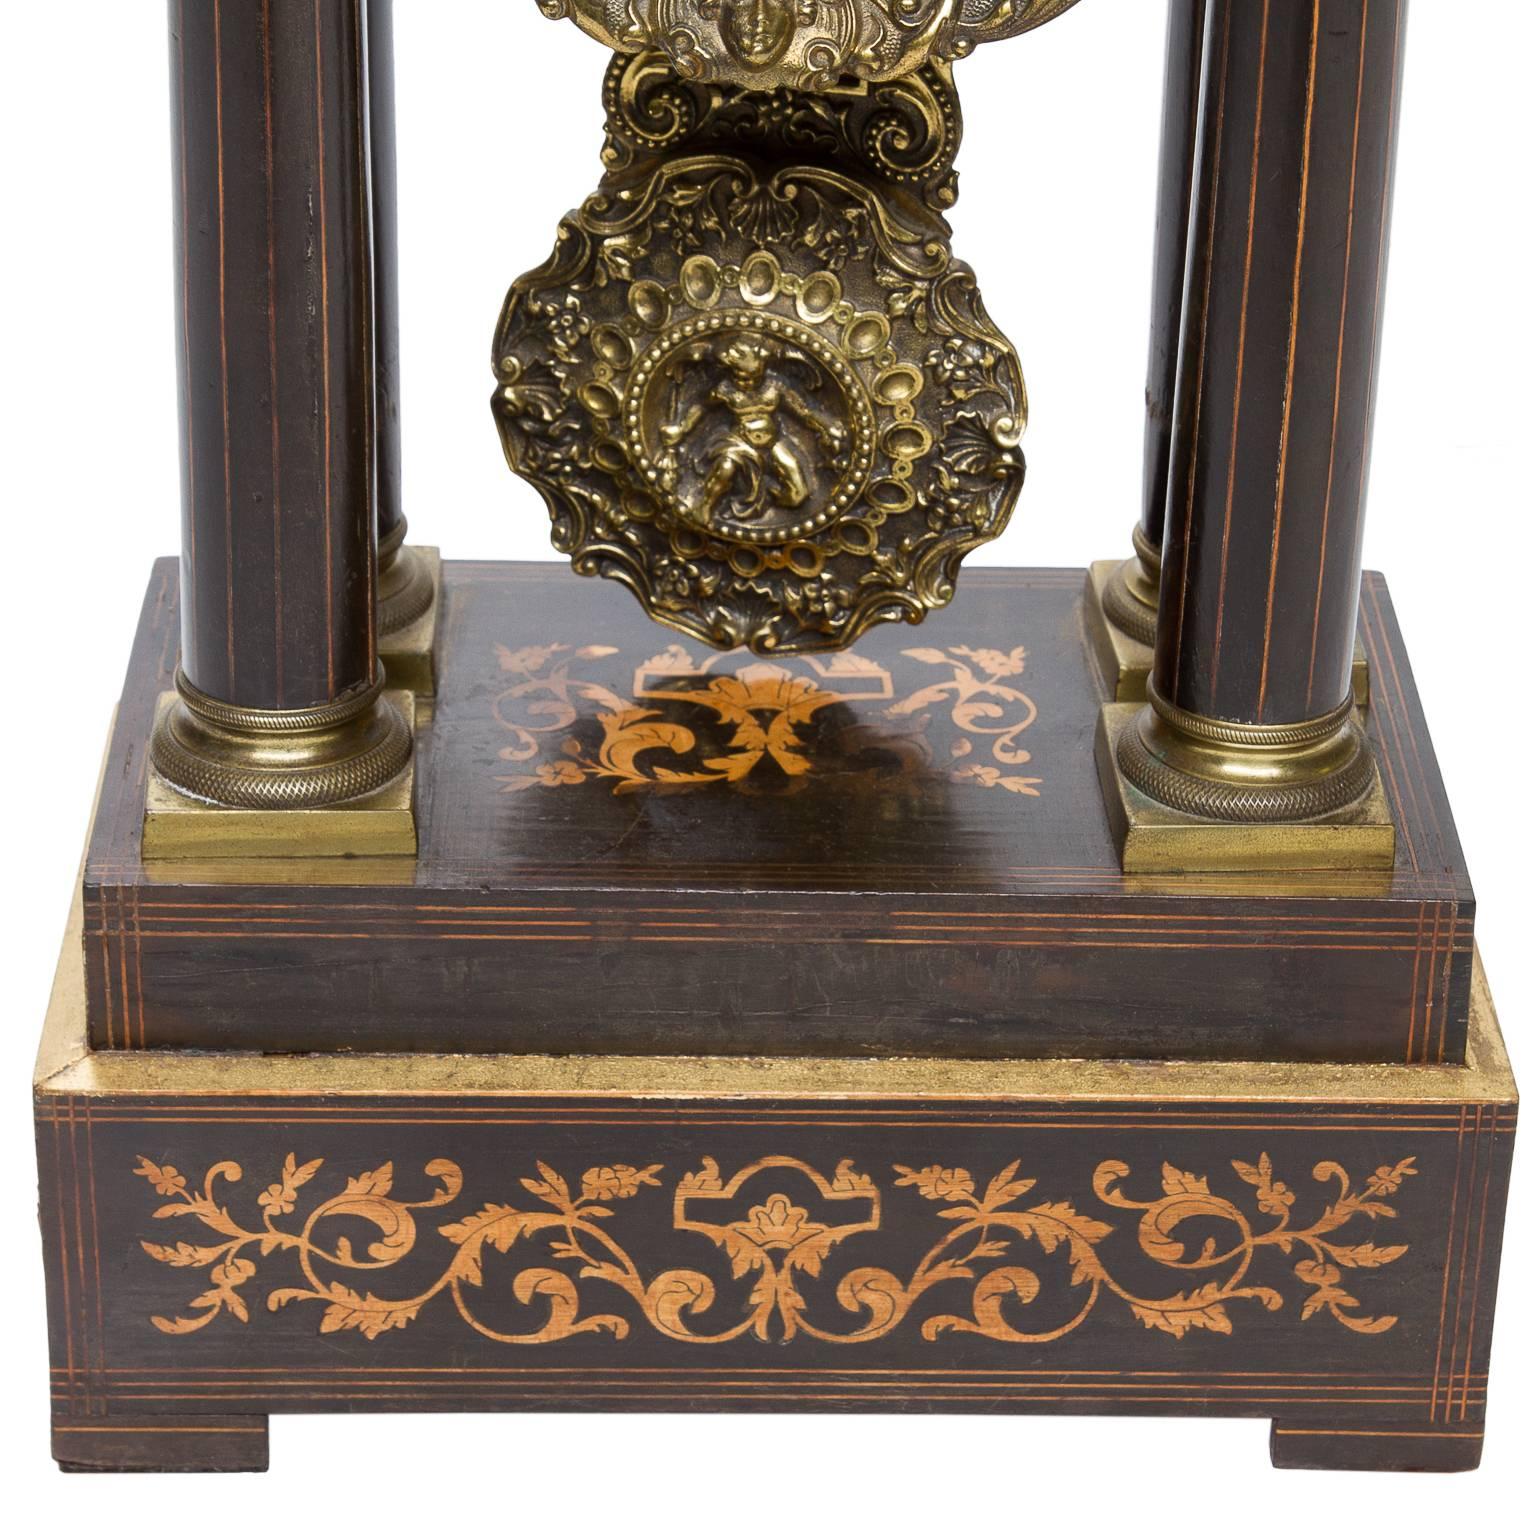 A very nice quality French rosewood and satinwood Portico mantel clock with boxwood inlay and fine boxwood stringing to the columns, finishing with brass gilt capitals. The clock has a decorative pendulum and face with silvered dial. The movement is